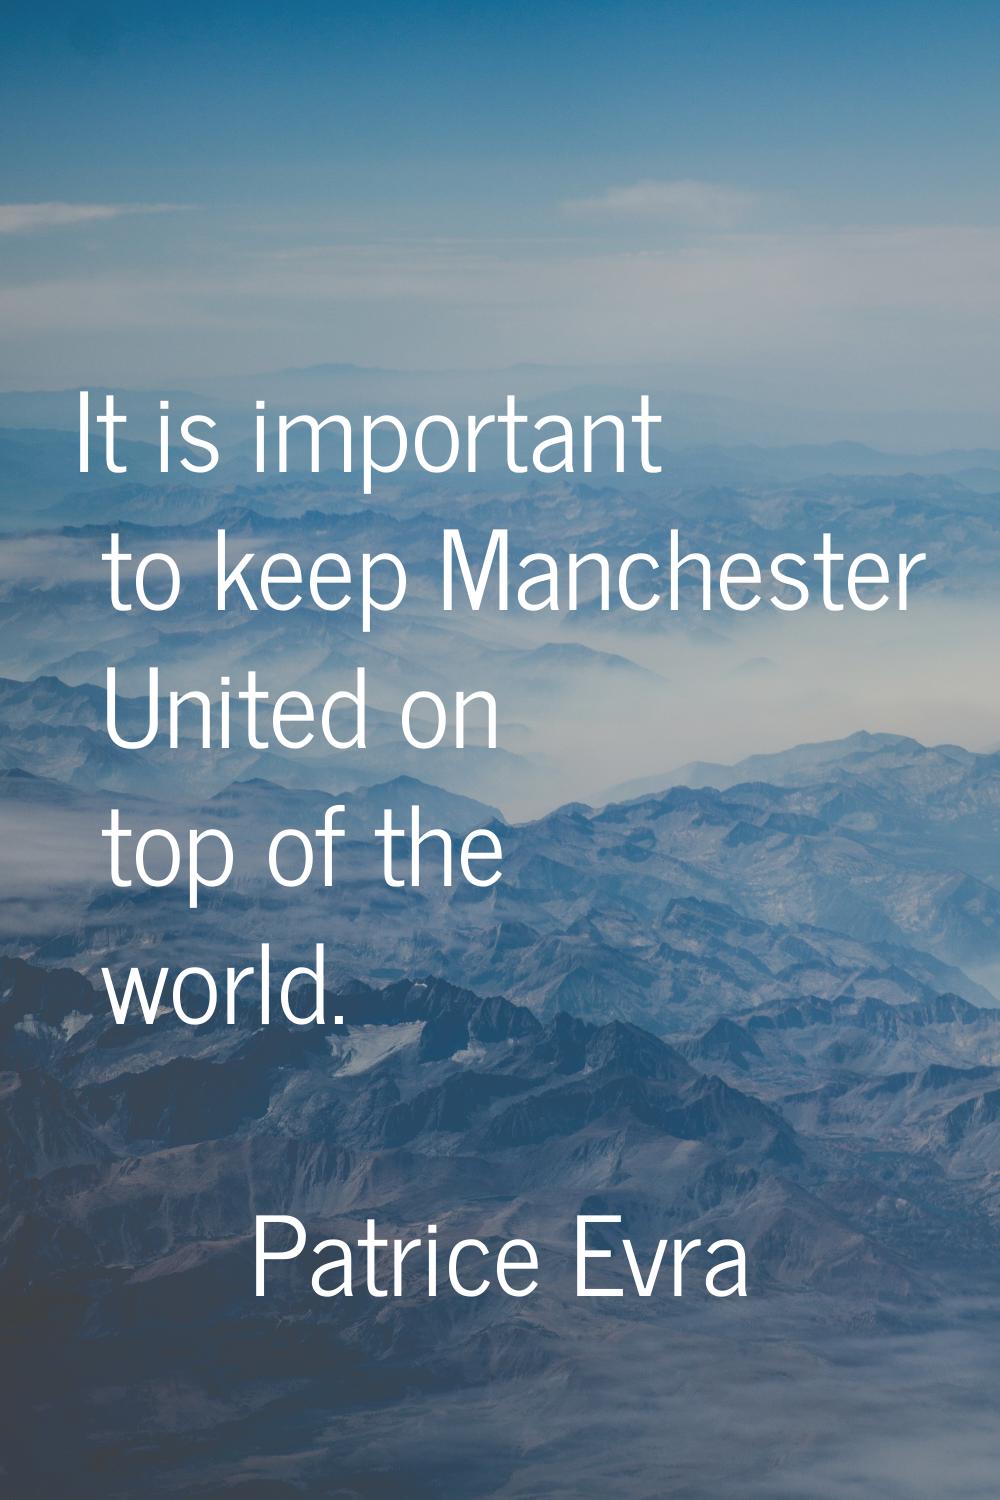 It is important to keep Manchester United on top of the world.